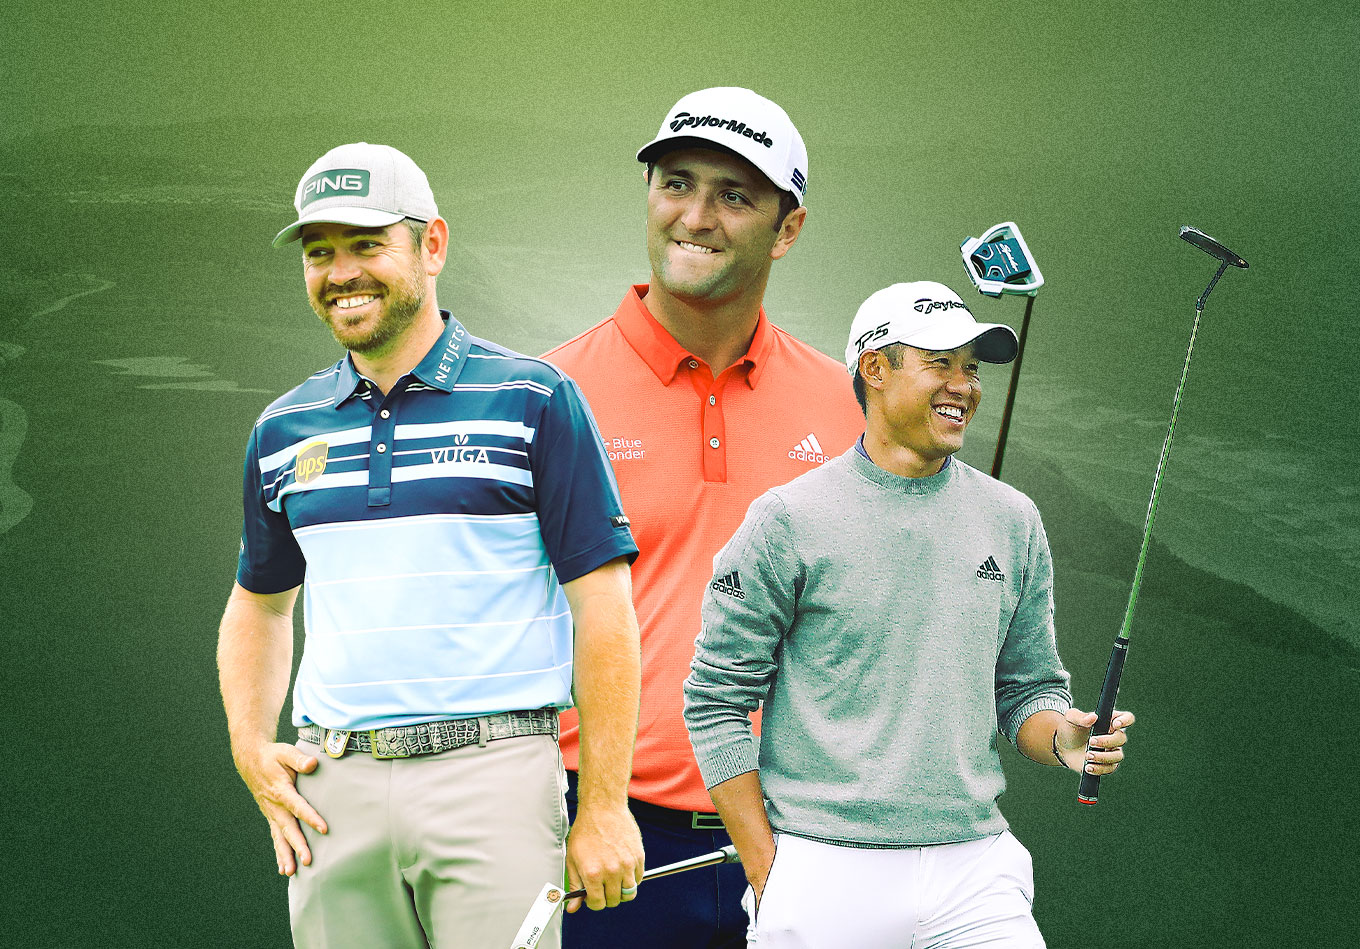 Rahm’s Revenge? The FRACAS Model’s Pick to Win and Players to Watch at the US Open